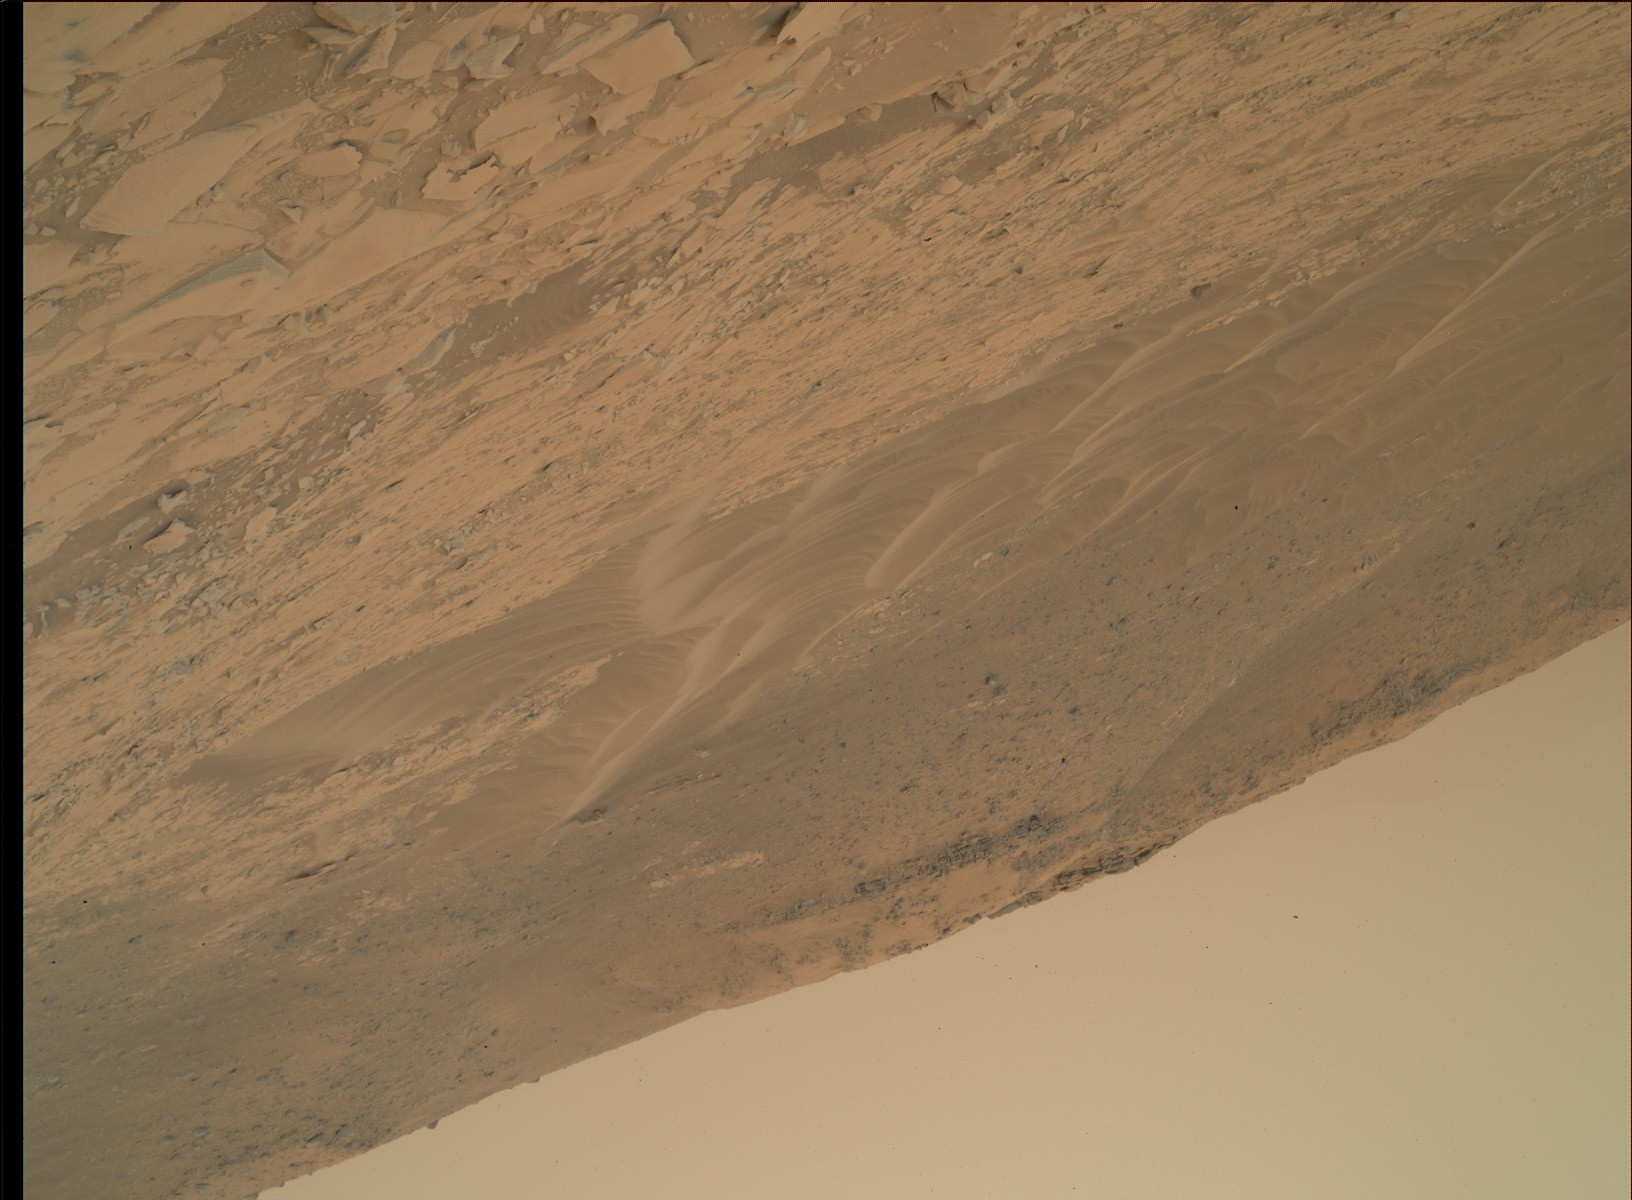 Nasa's Mars rover Curiosity acquired this image using its Mars Hand Lens Imager (MAHLI) on Sol 792